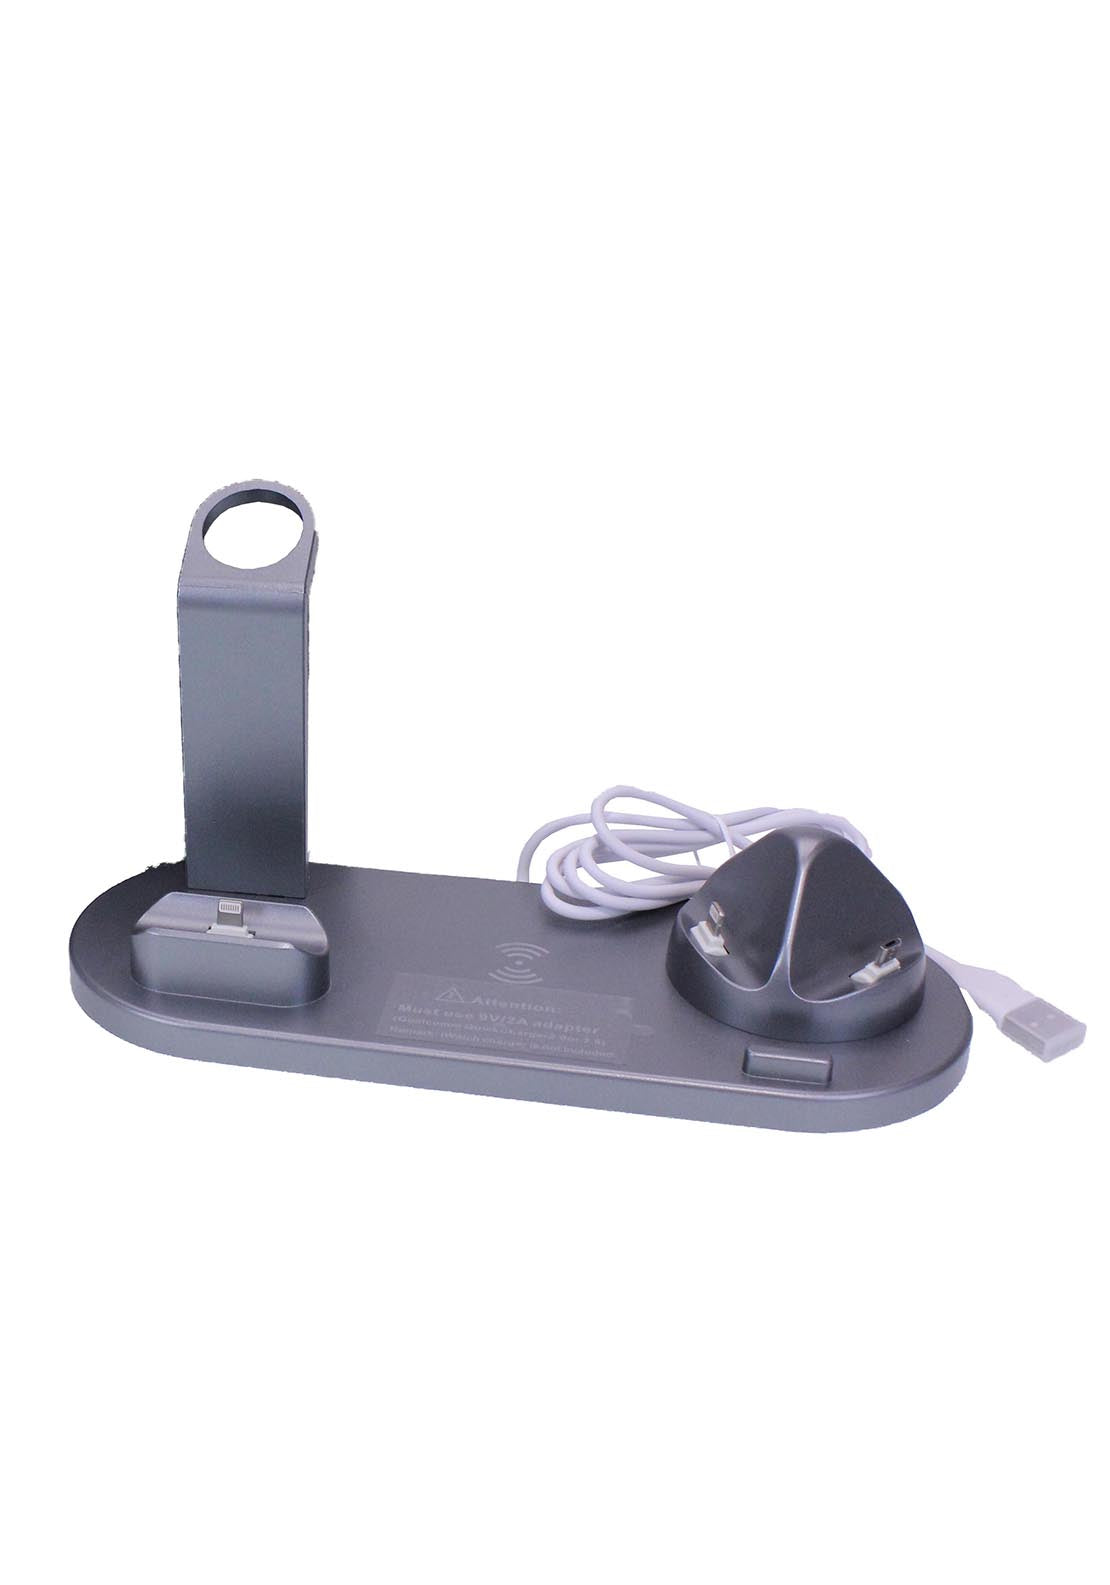 Brandwell Multi- Docking Station With Qi Wireless 2 Shaws Department Stores